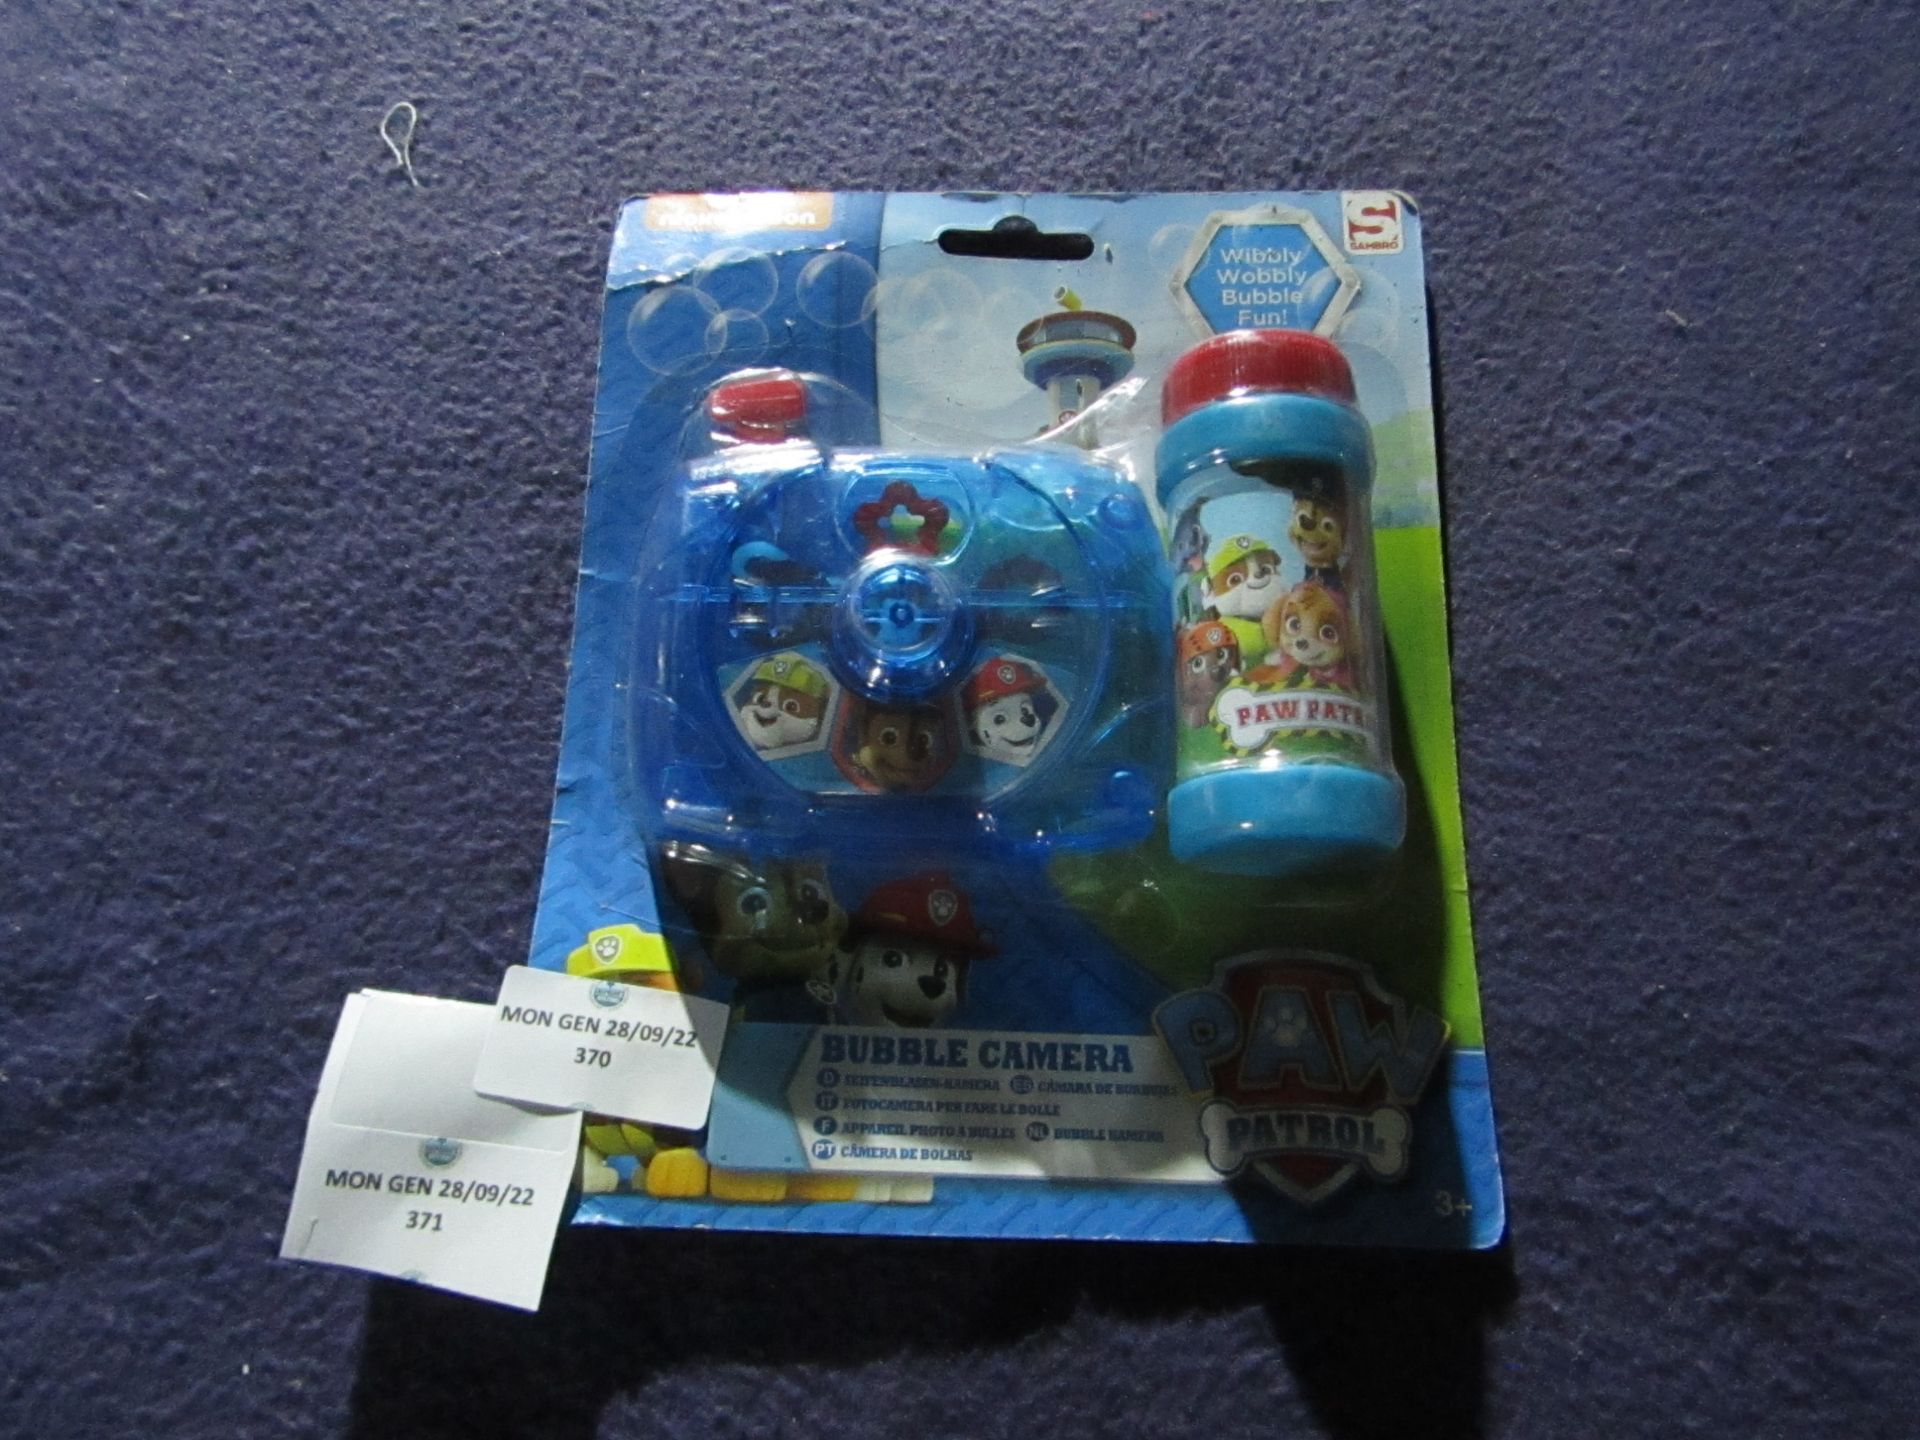 Paw Patrol - Bubble Camera - Unused & Packaged.